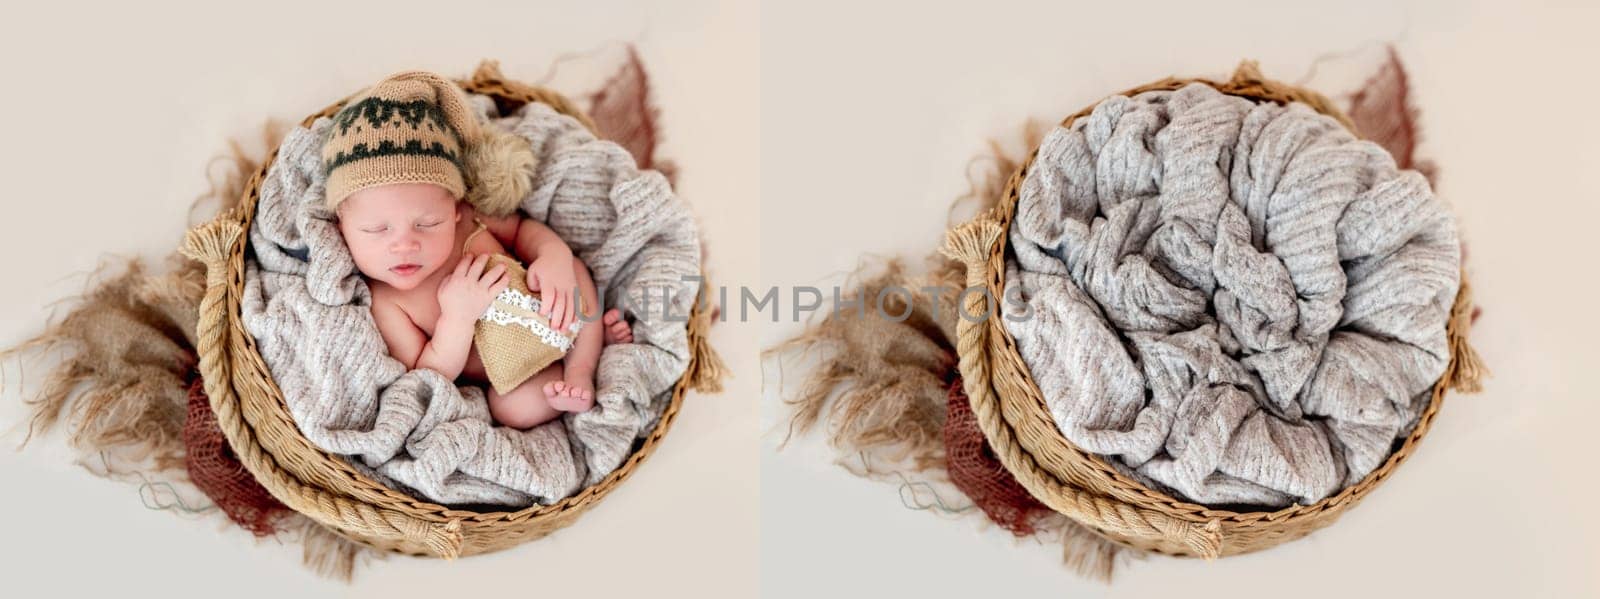 Sweet newborn with toy resting in a white round cradle. Collage mix with infant and studio furniture for kid photoshoot